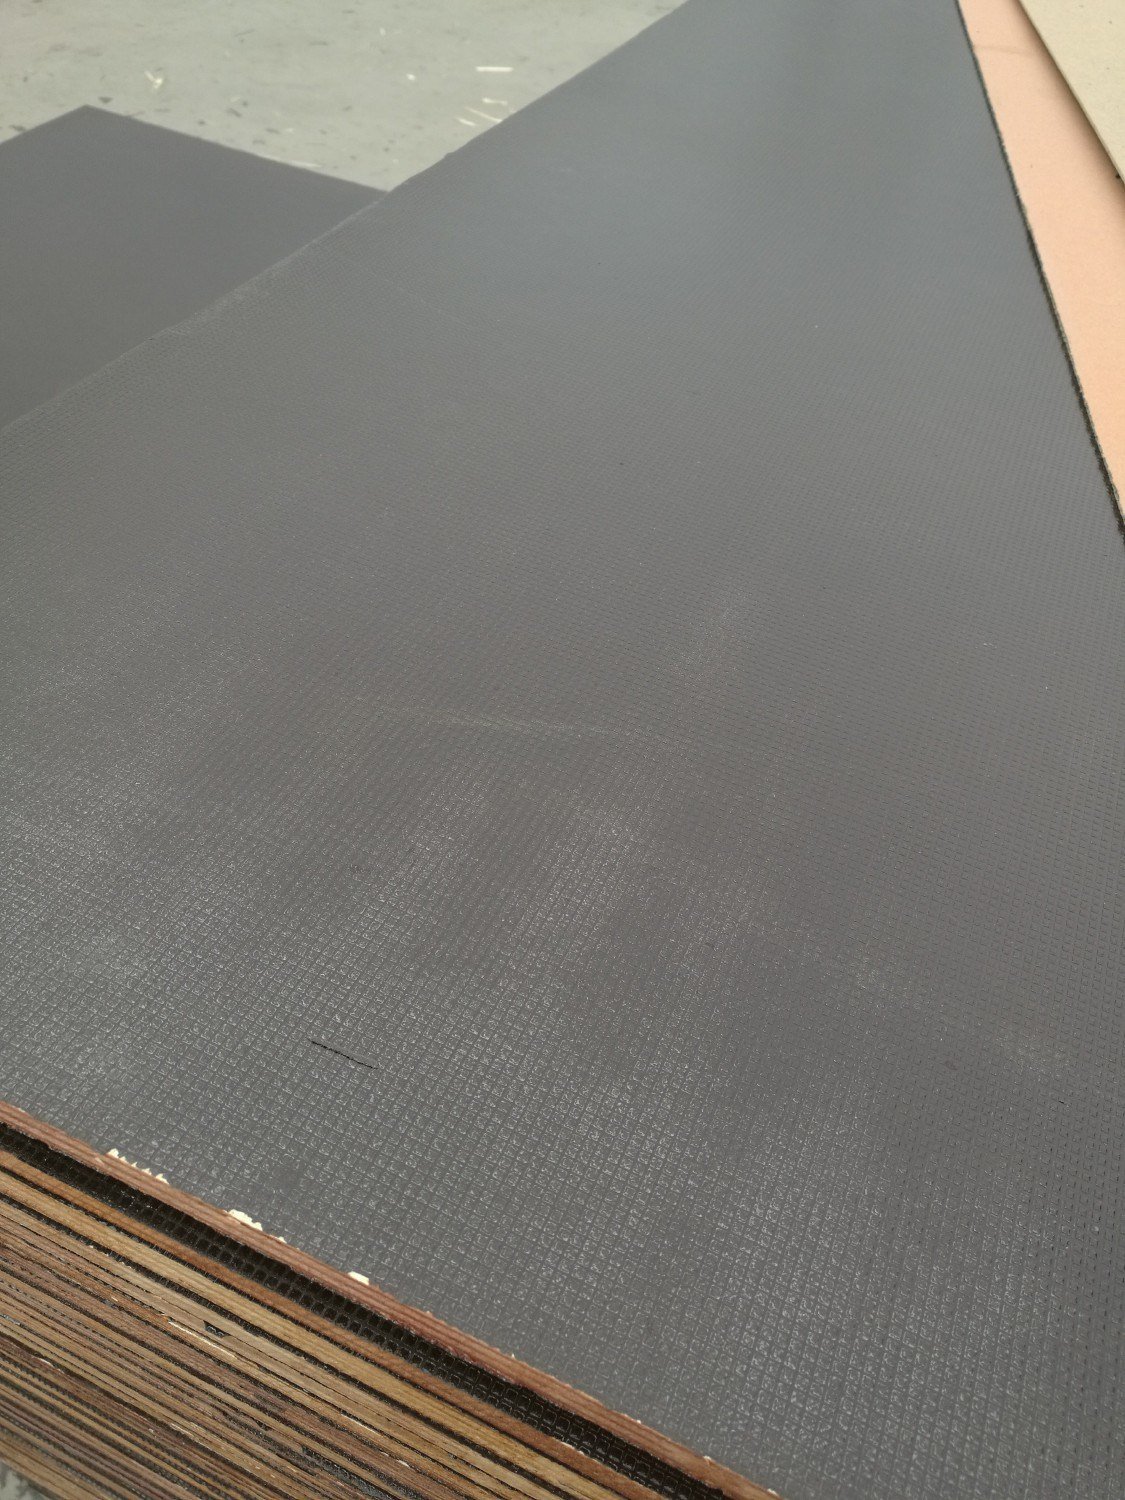 Hexa Plywoo/Wiremesh Film Faced Plywood